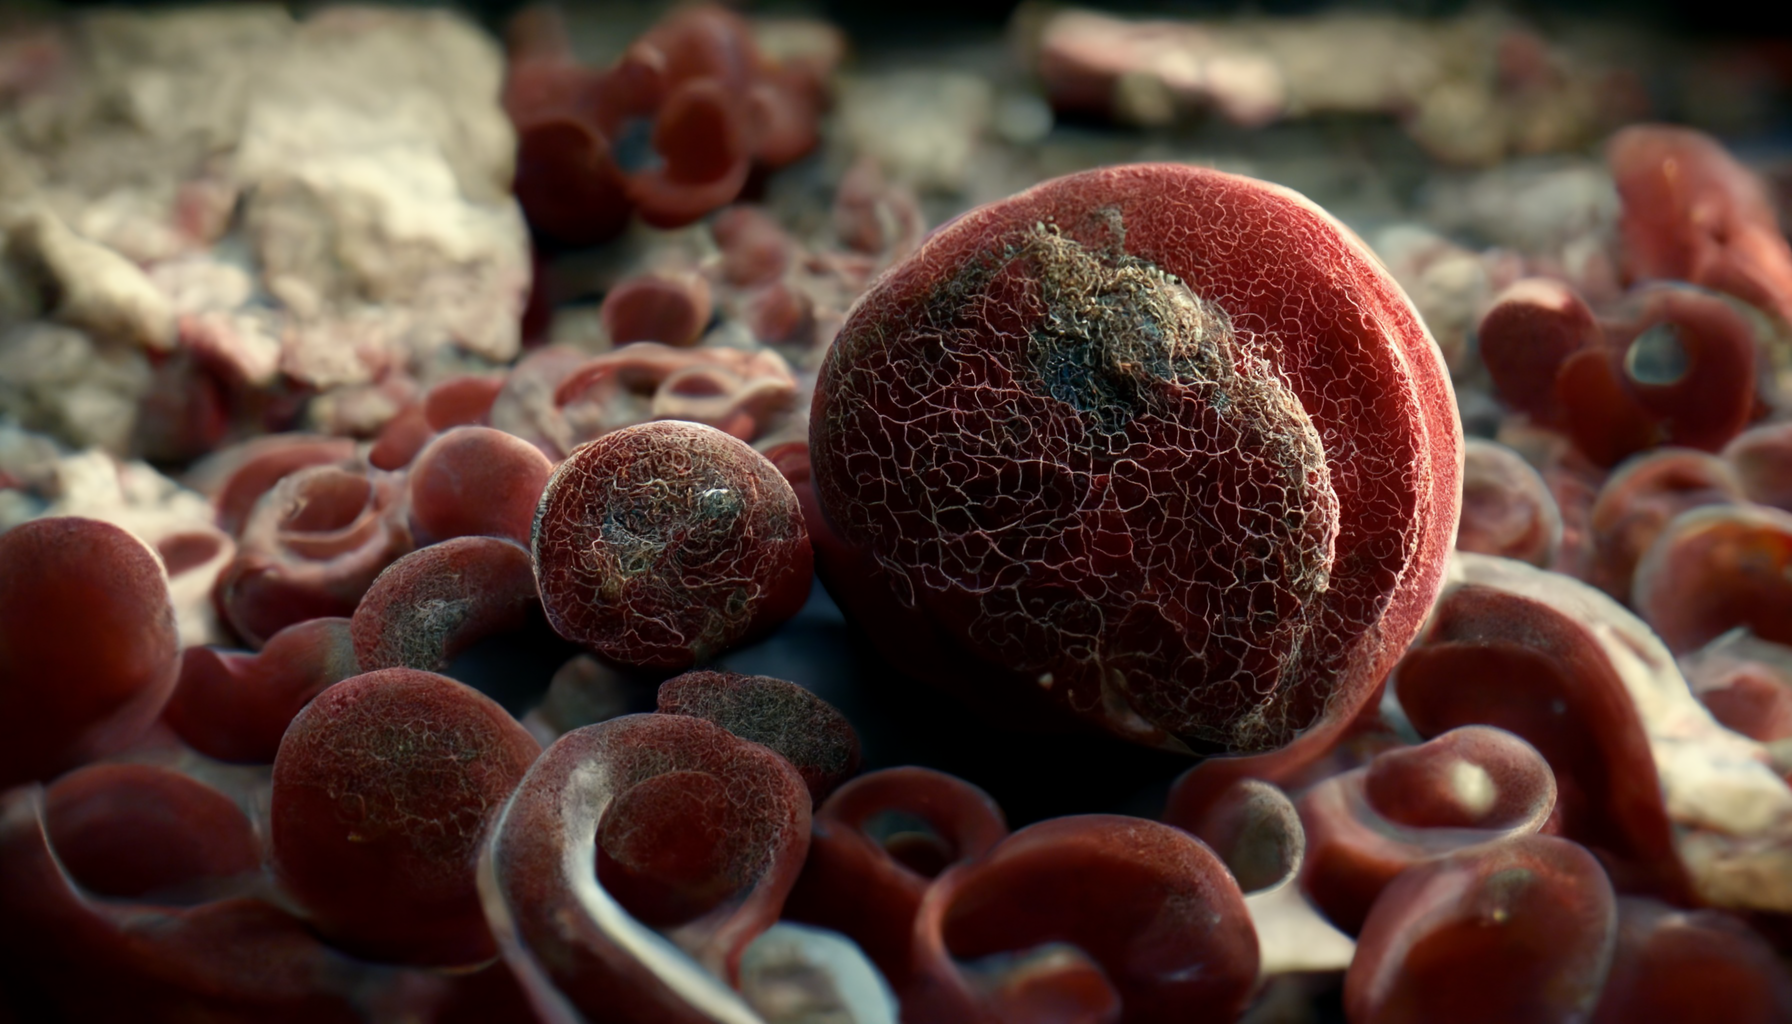 Christopher_A_erythrocyte_in_the_body_high_detail_8K_hyper_real_af5f1469-6c14-4e9f-a2f5-3d8e3325e065.png